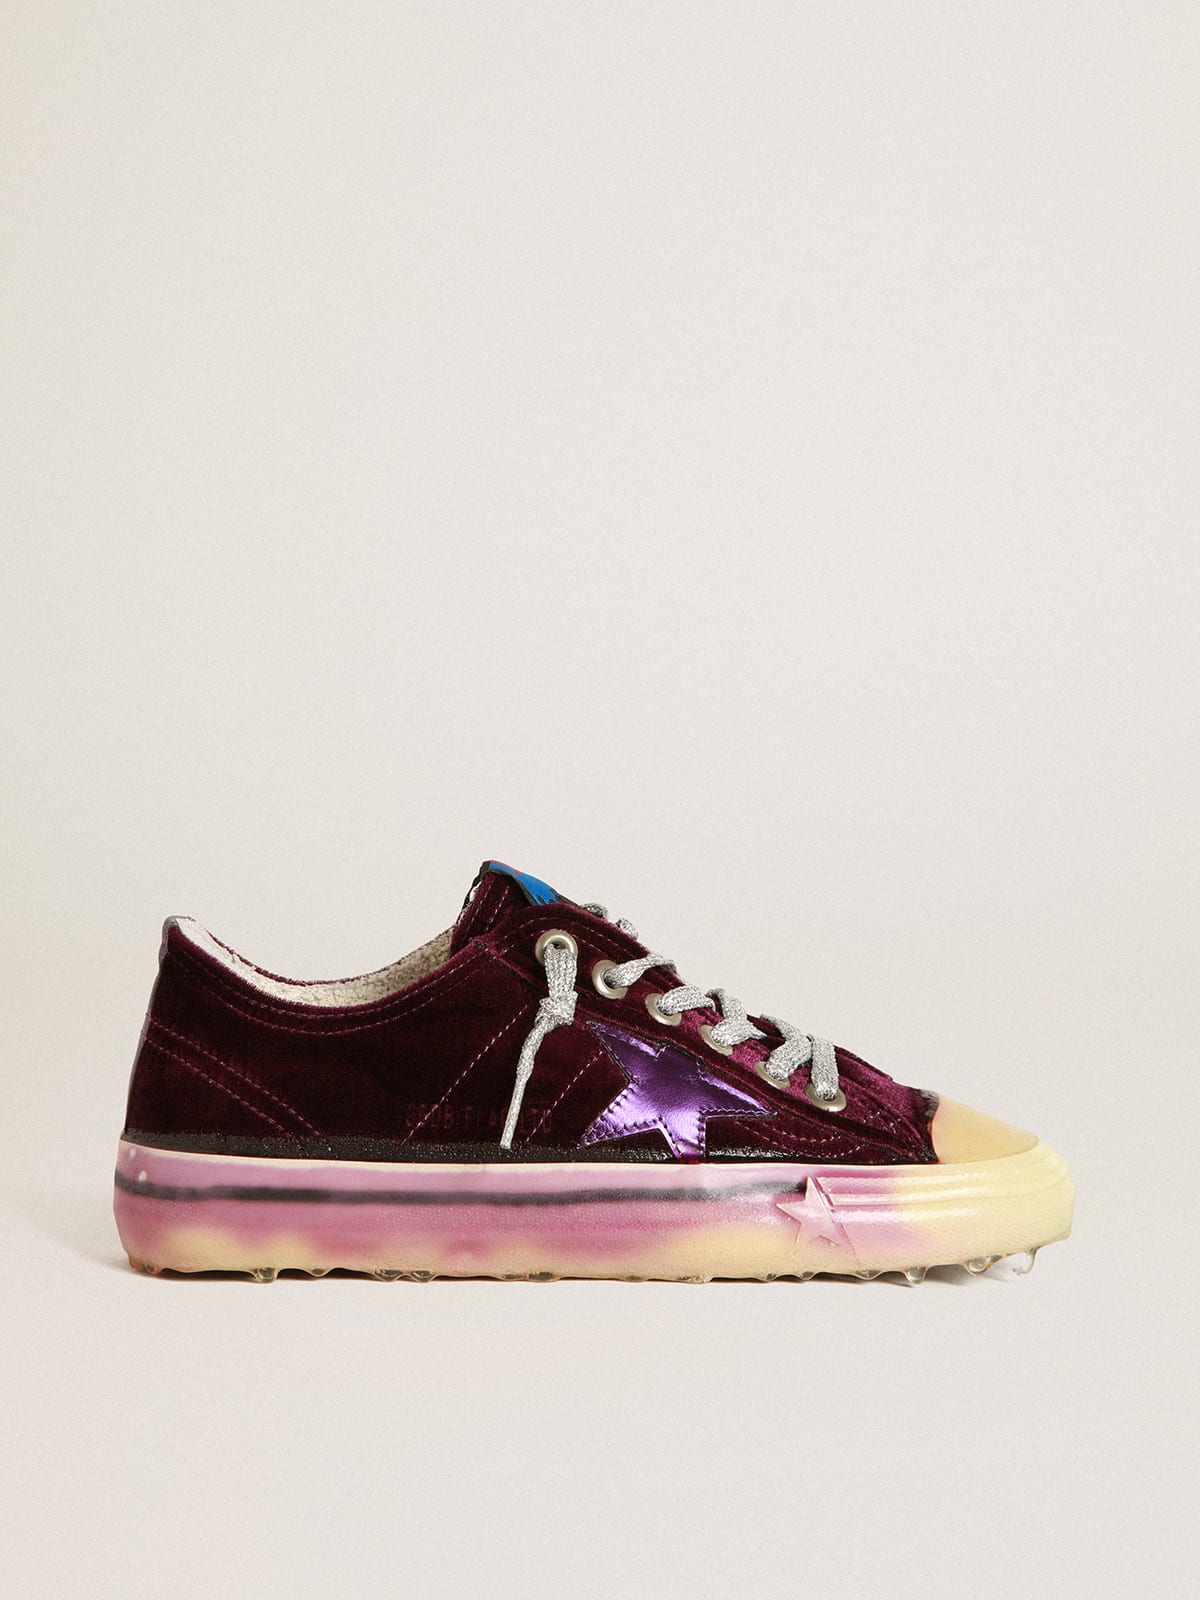 V-Star LTD sneakers in purple velvet with a pale purple laminated leather star and heel tab